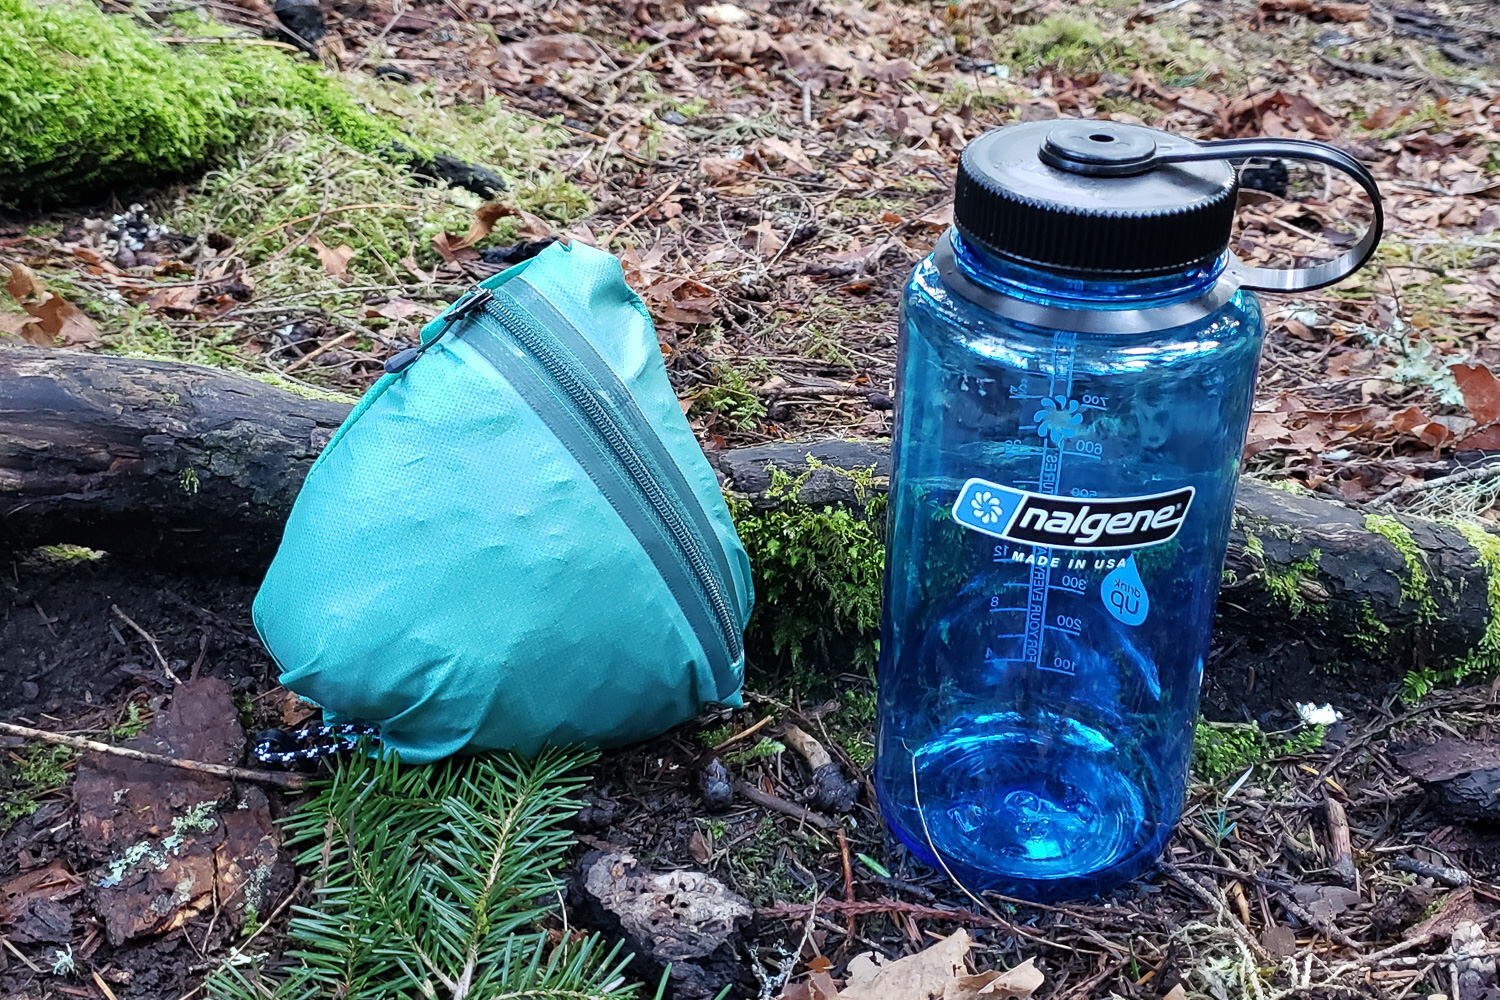 The Helium Rain Jacket next to a 1L water bottle